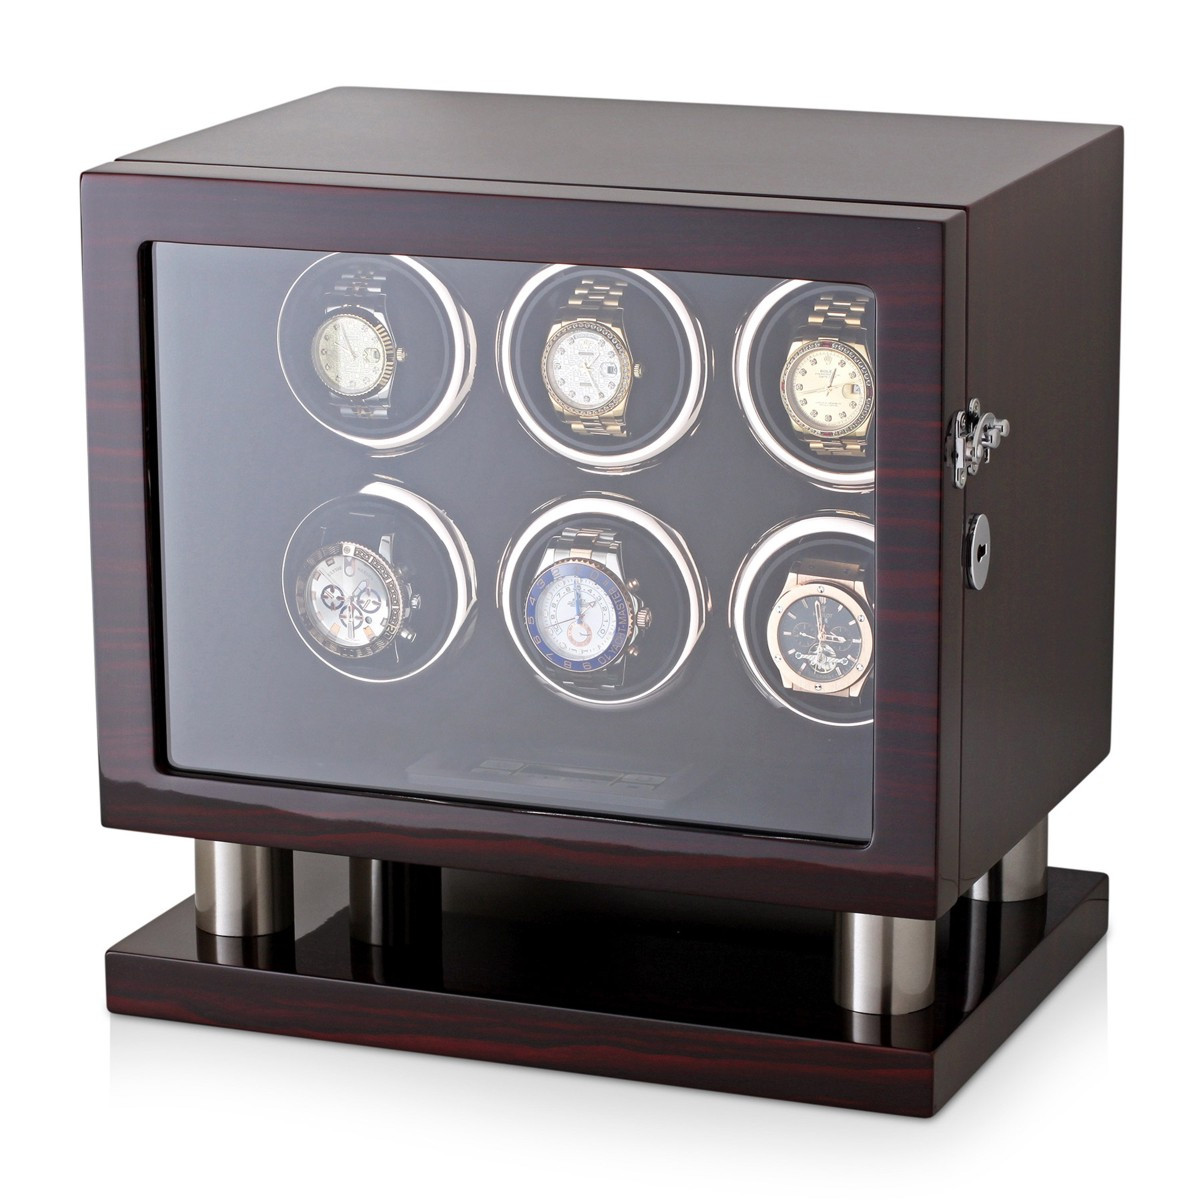 Watch Winder 8006-EF-D for 6 Automatic Watches with LED Backlight and LCD